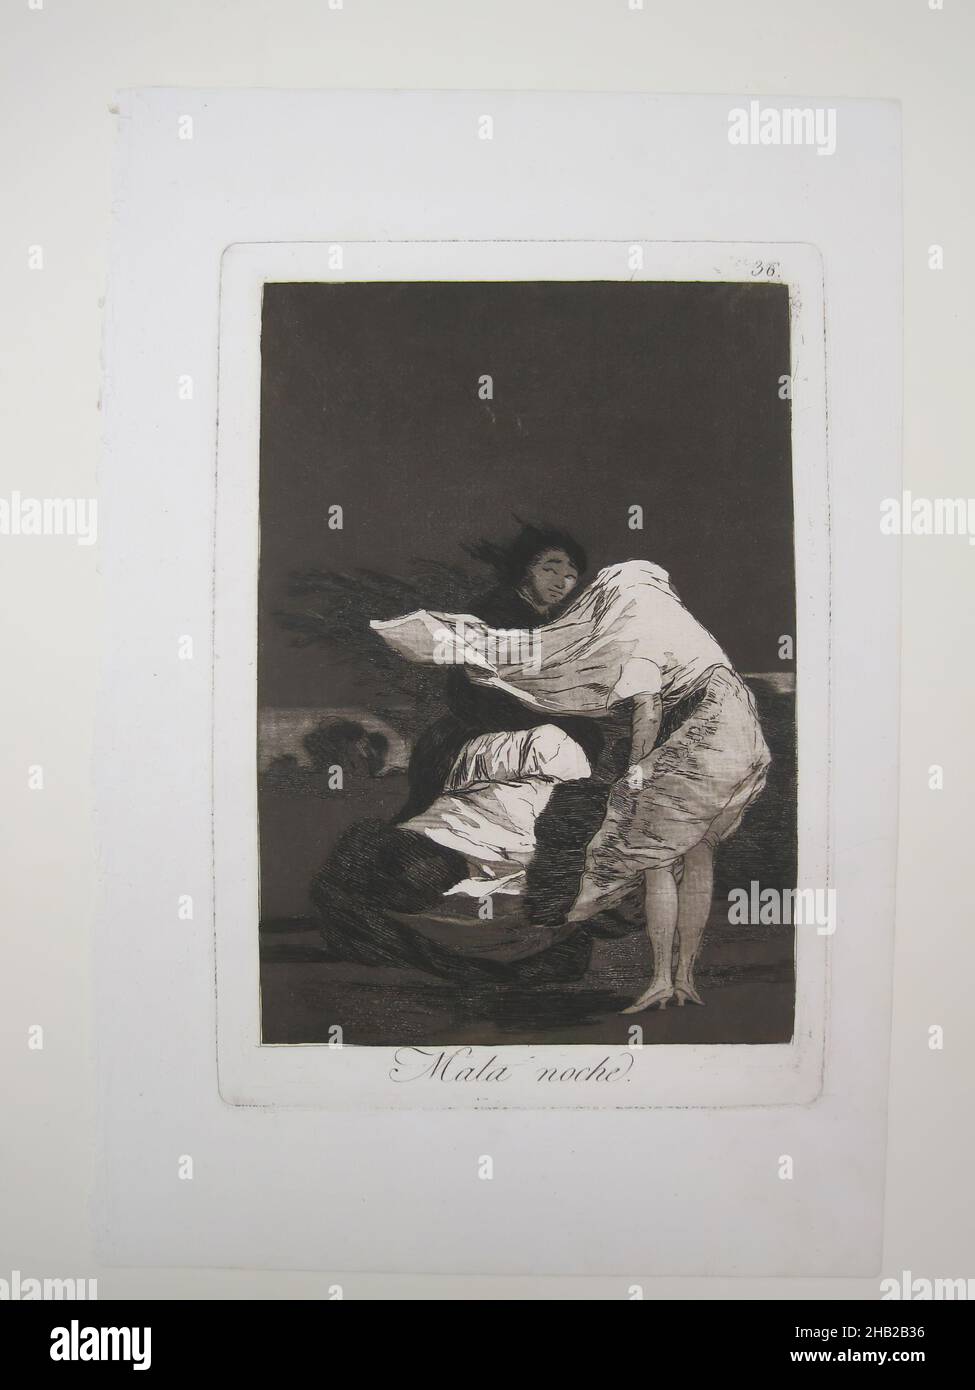 A Bad Night, Mala noche, Los Caprichos, Plate 36, Francisco de Goya y Lucientes, Spanish, 1746-1828, Etching and aquatint on laid paper, Spain, 1797-1798, Sheet: 11 7/8 x 7 15/16 in., 30.2 x 20.2 cm, Aquatint, Engraving, Etching, Print, Satire, Satirical, Spain, Spanish Stock Photo